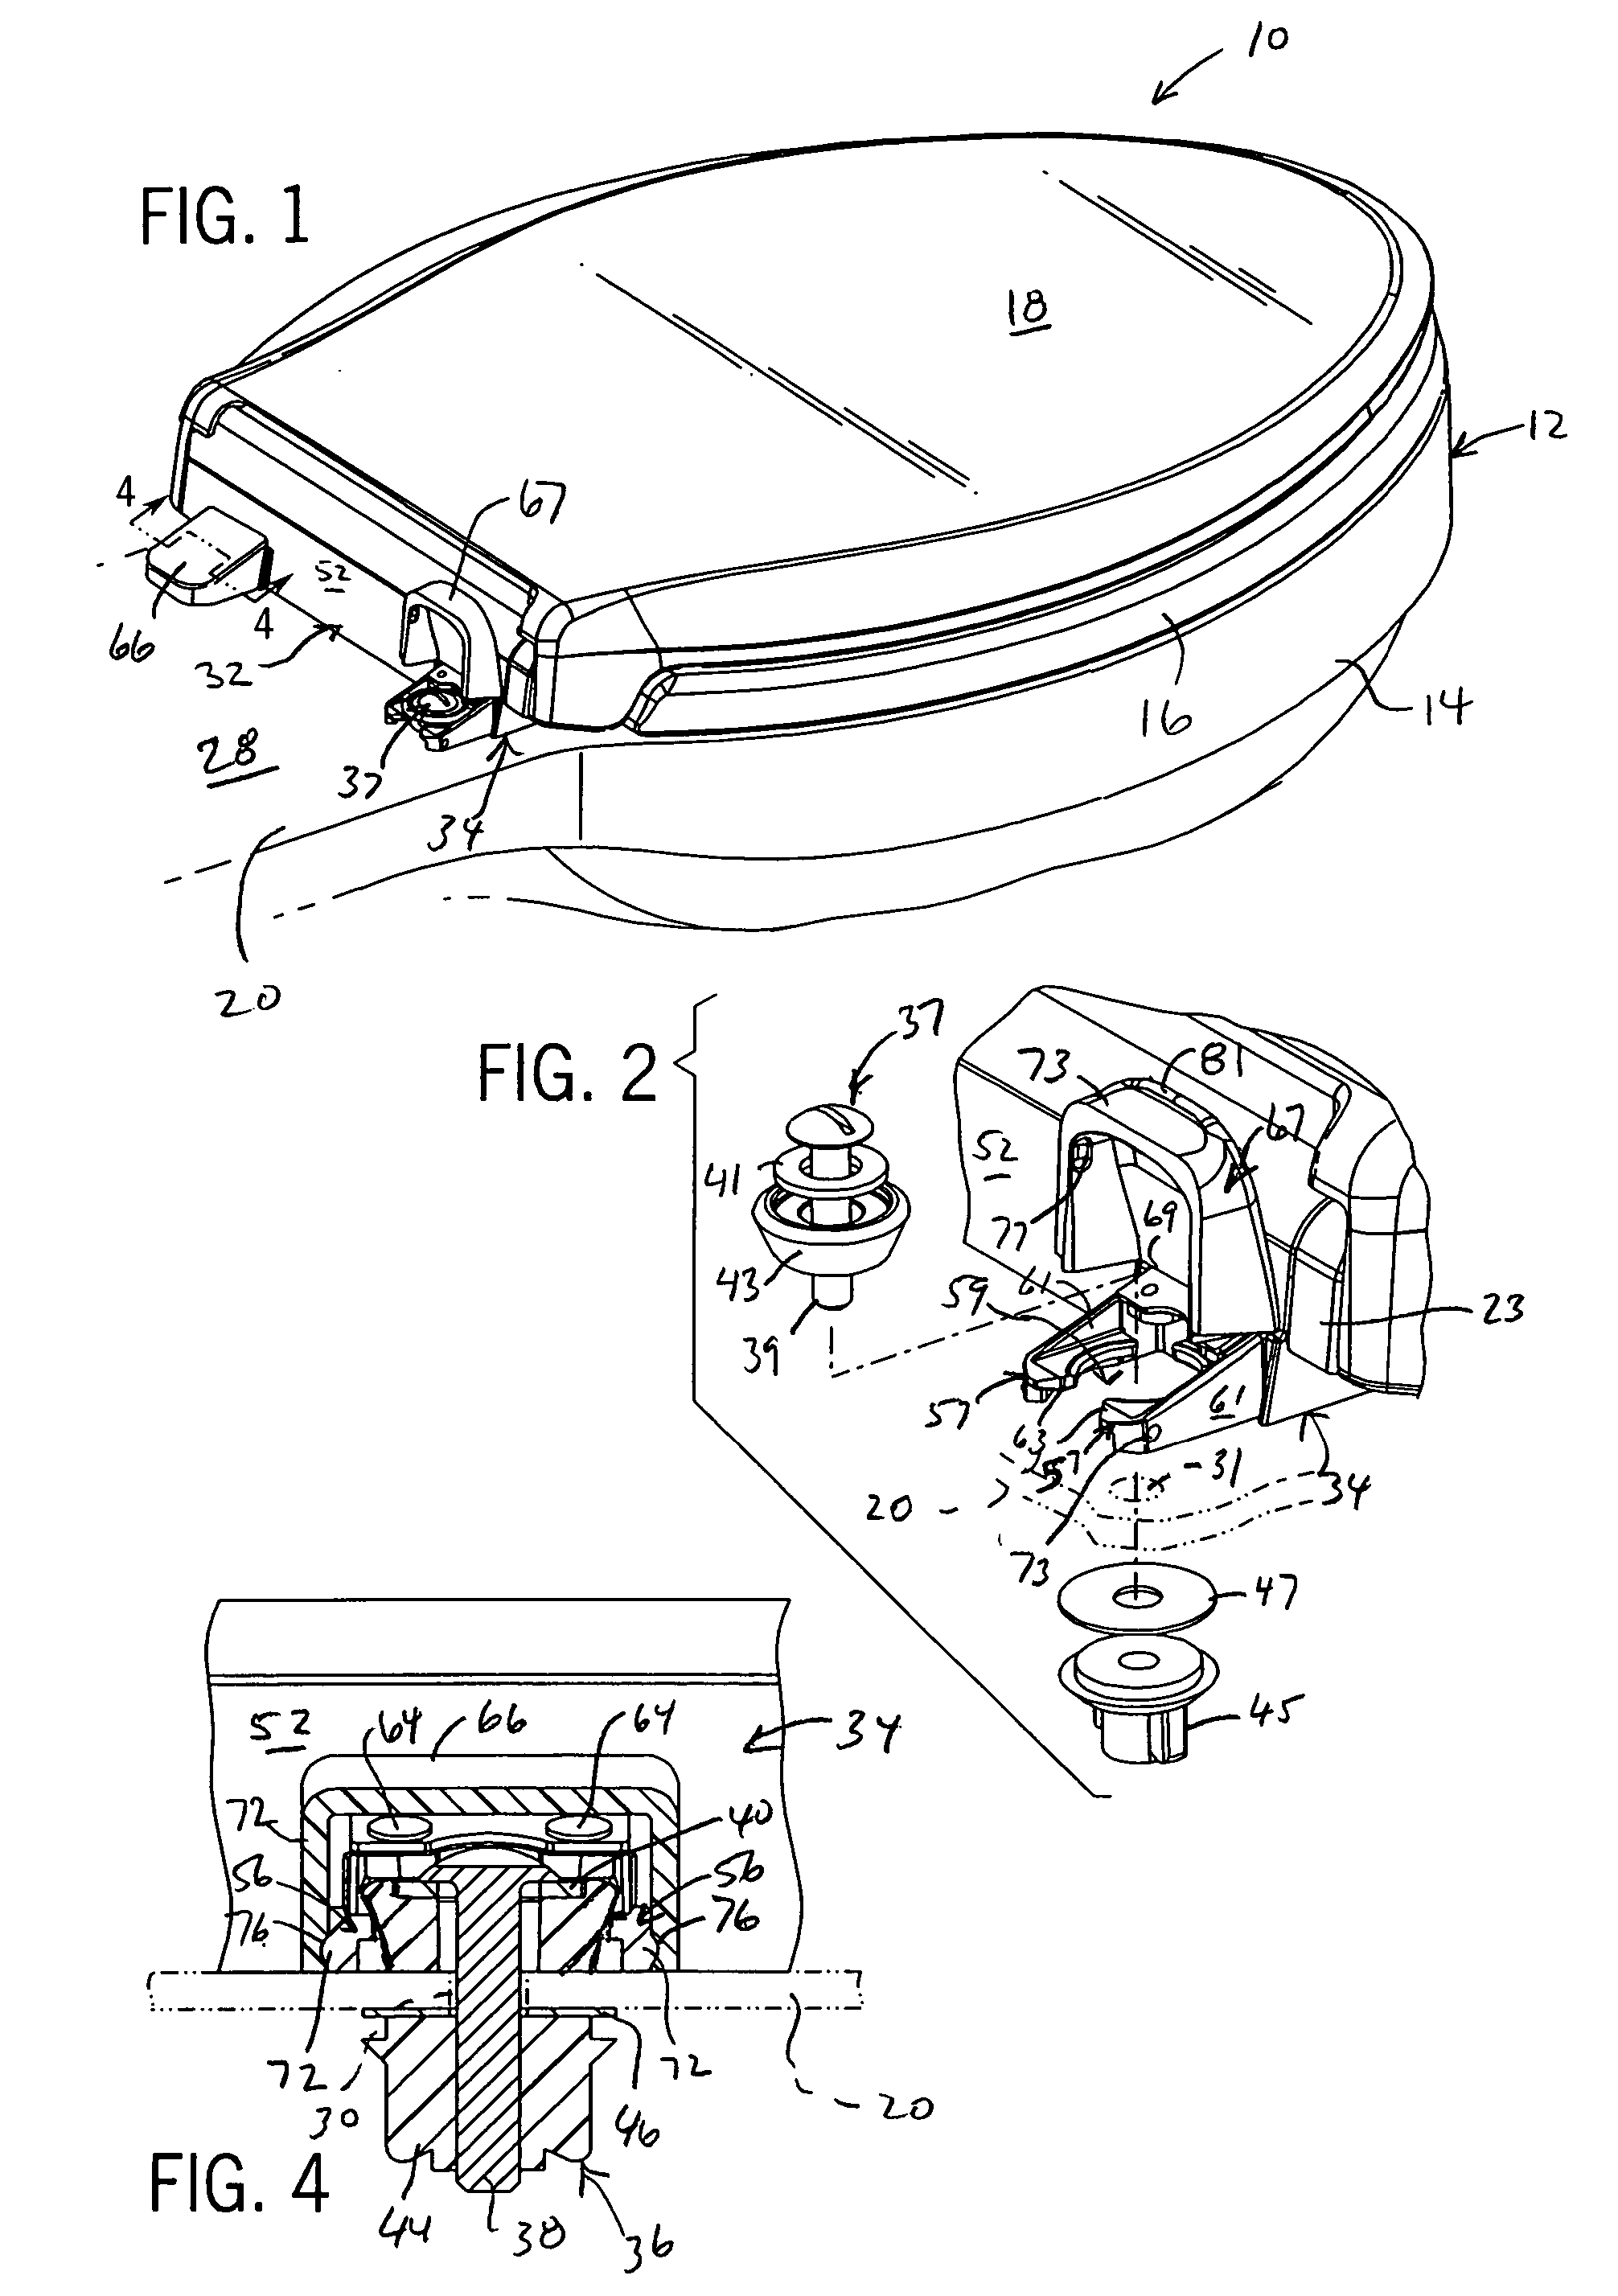 Releasable toilet seat assembly